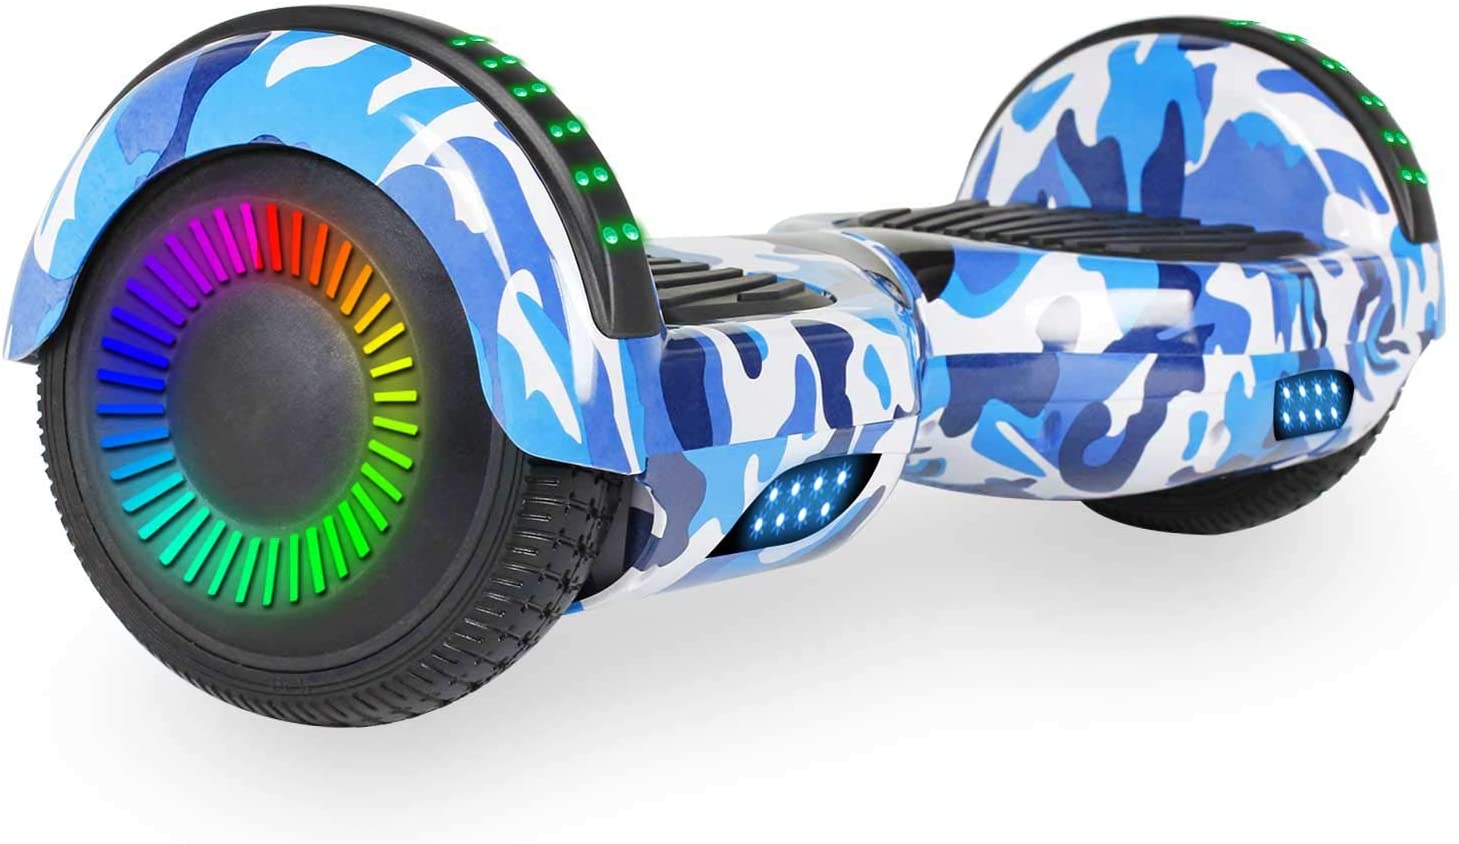 Hoverboard, UL2272 Certified, with Bluetooth and Colorful Lights Self Balancing Scooter - Sky Camo